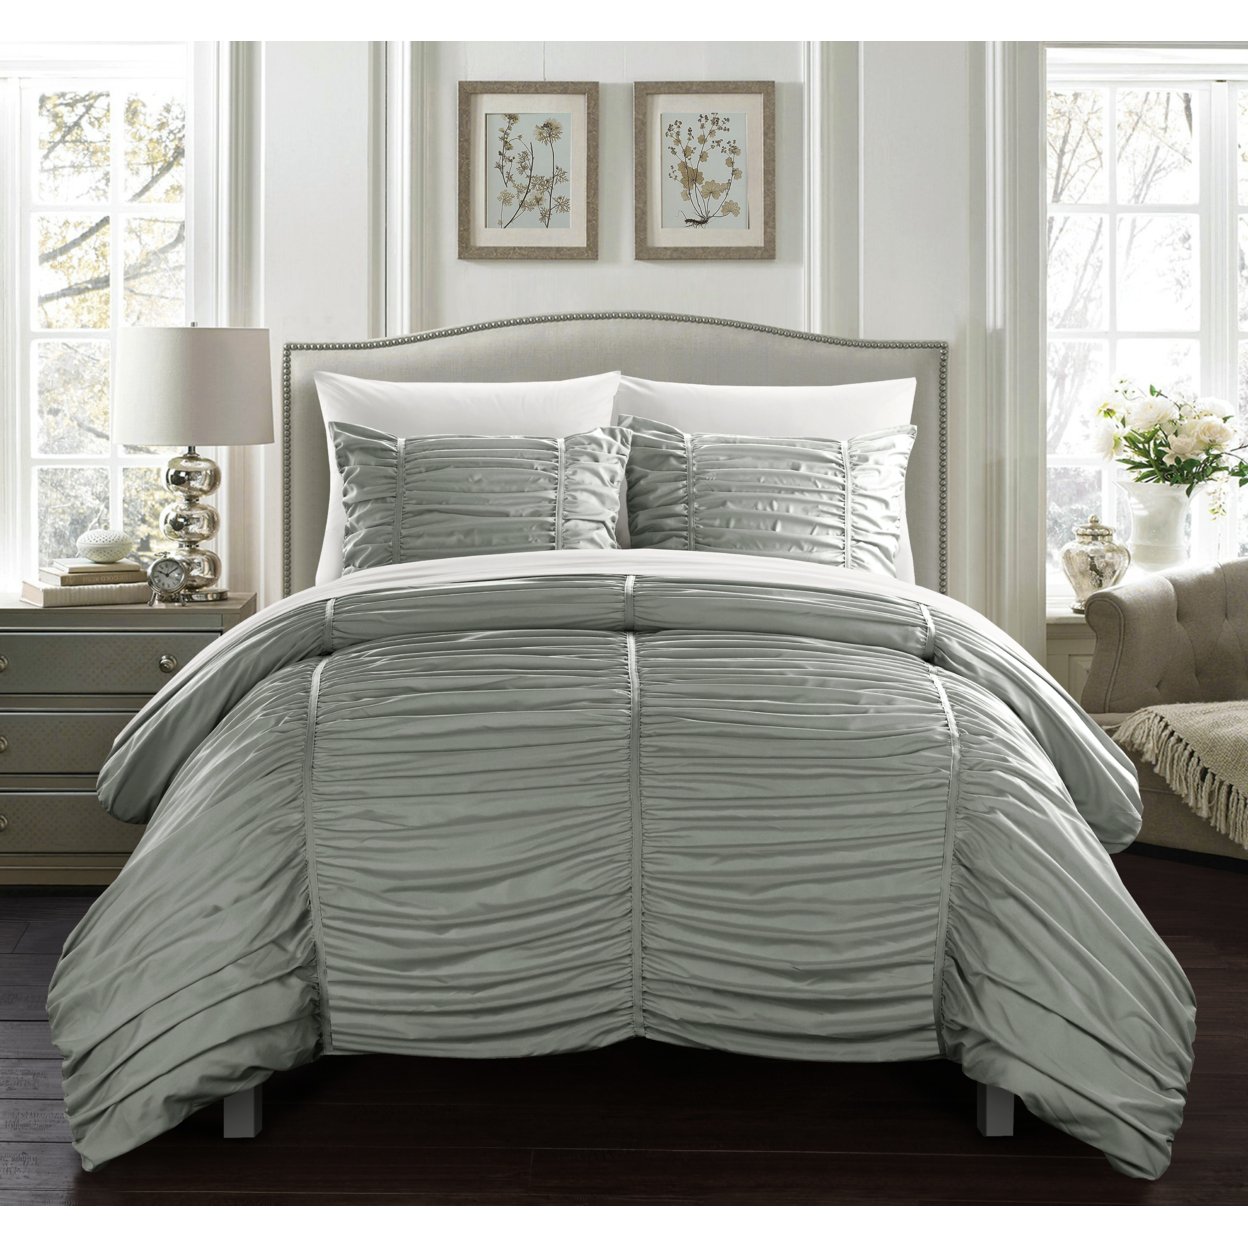 Kiela 2 Pc Or 3 Pc Ruched Comforter Set - Grey, Queen